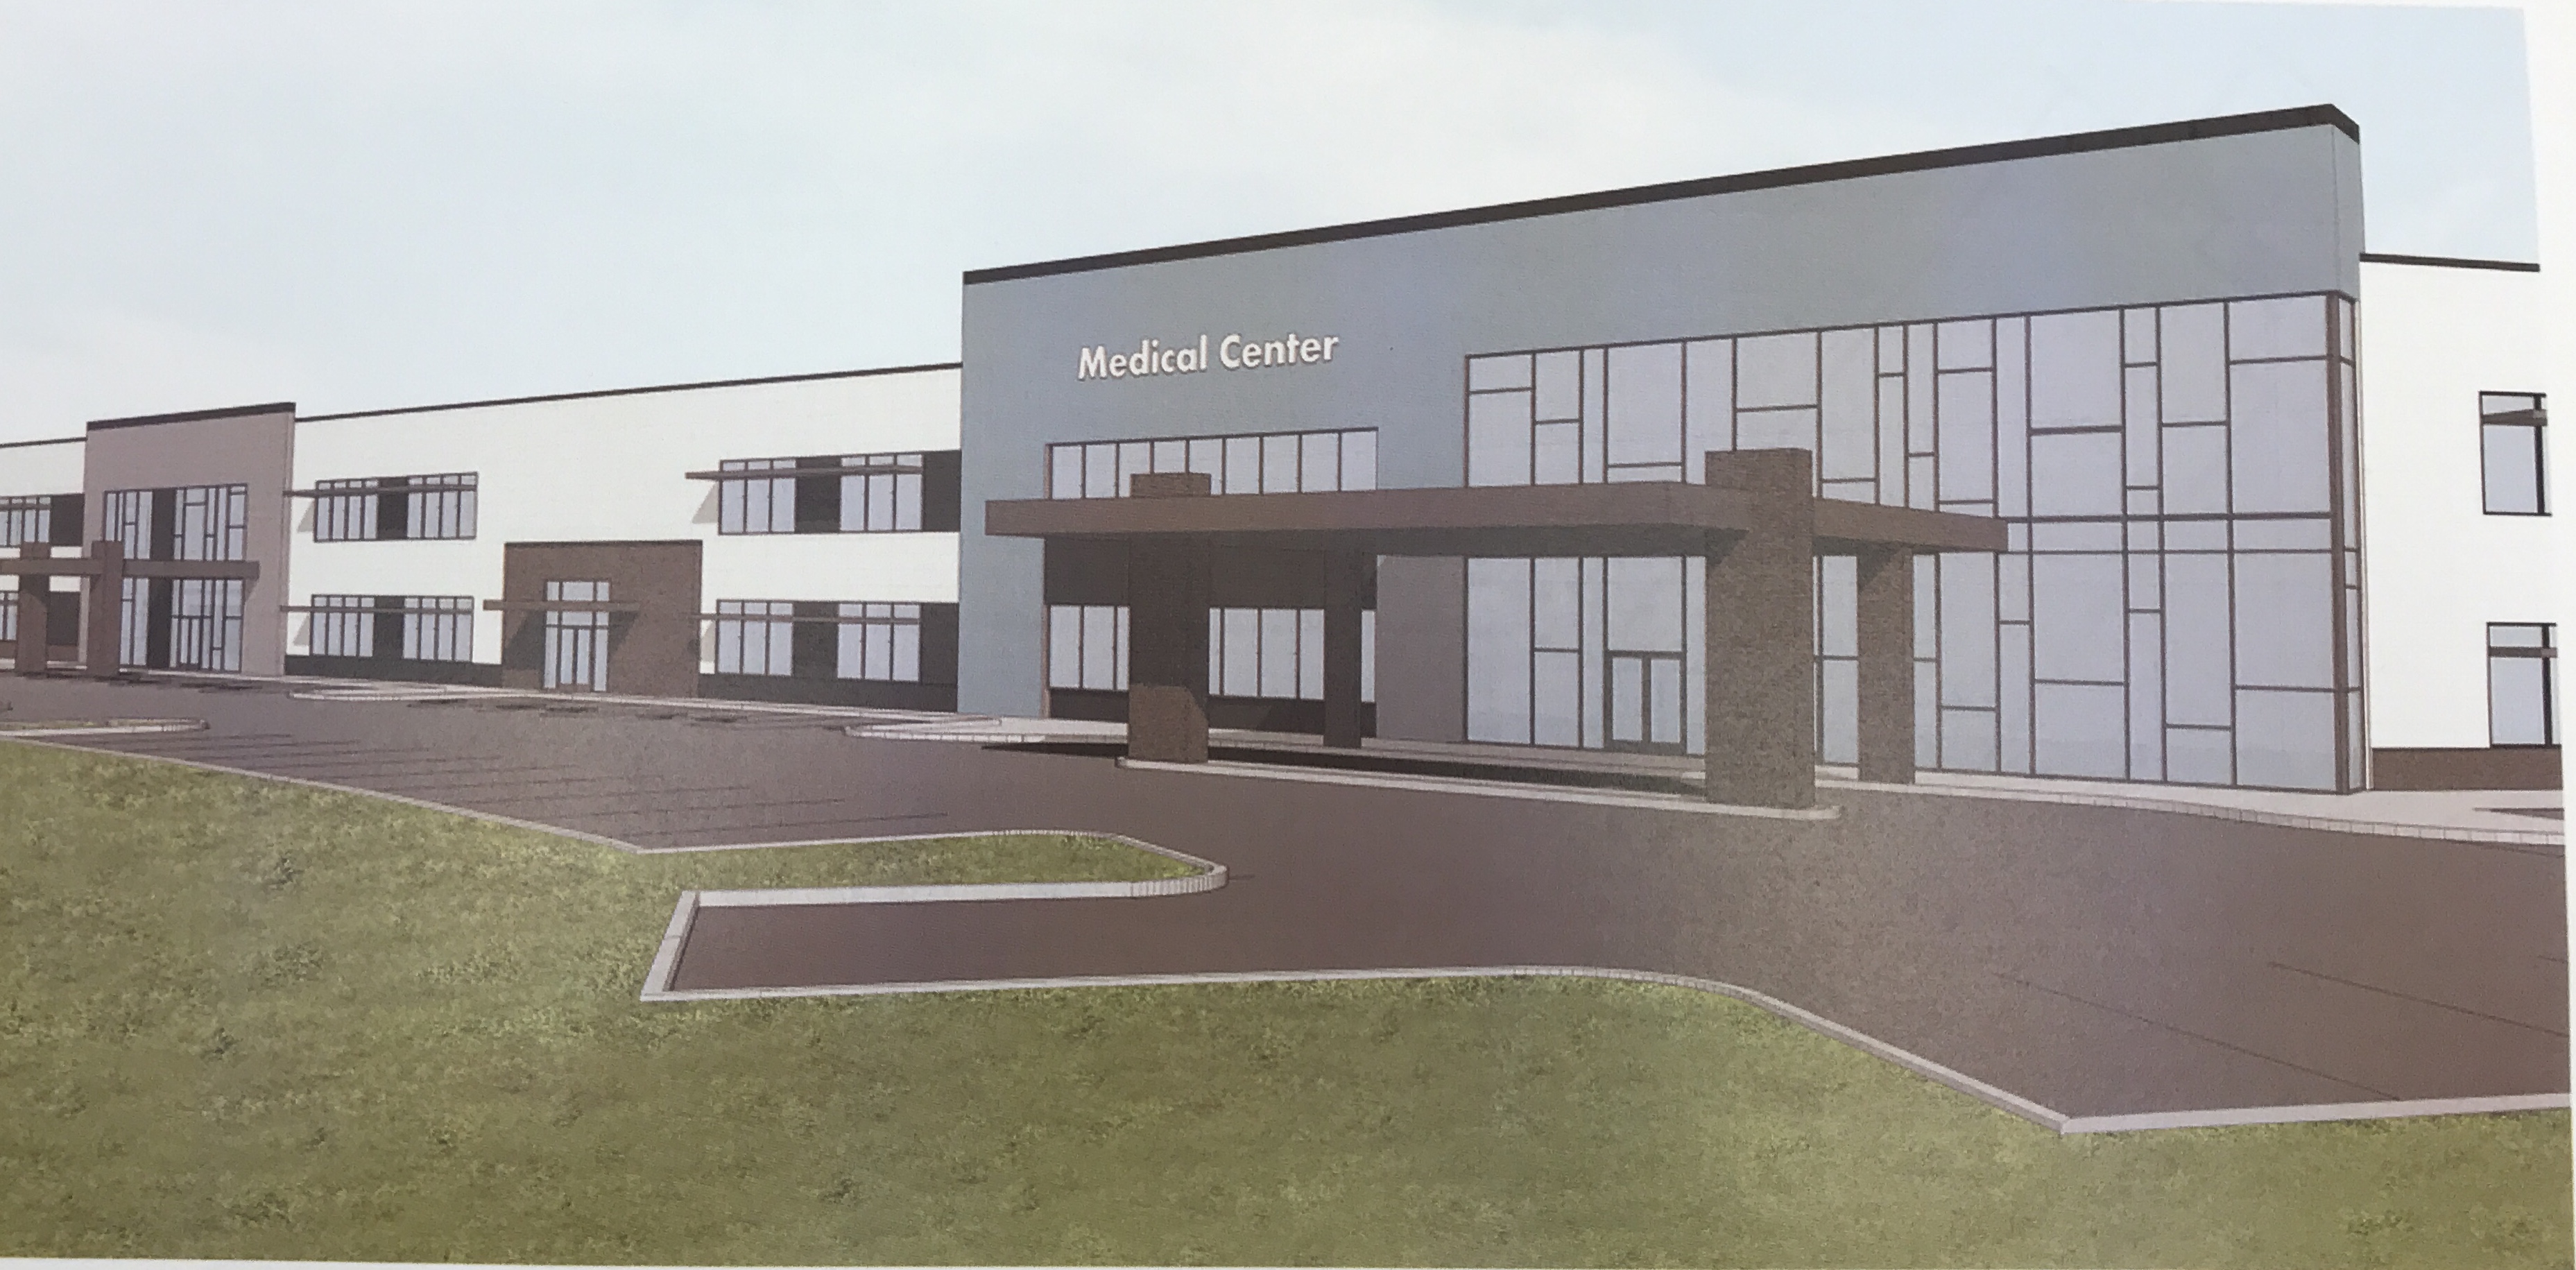 A rendering of a proposed medical facility on the 'triangle lot' in Brick Township. (Photo: Daniel Nee)